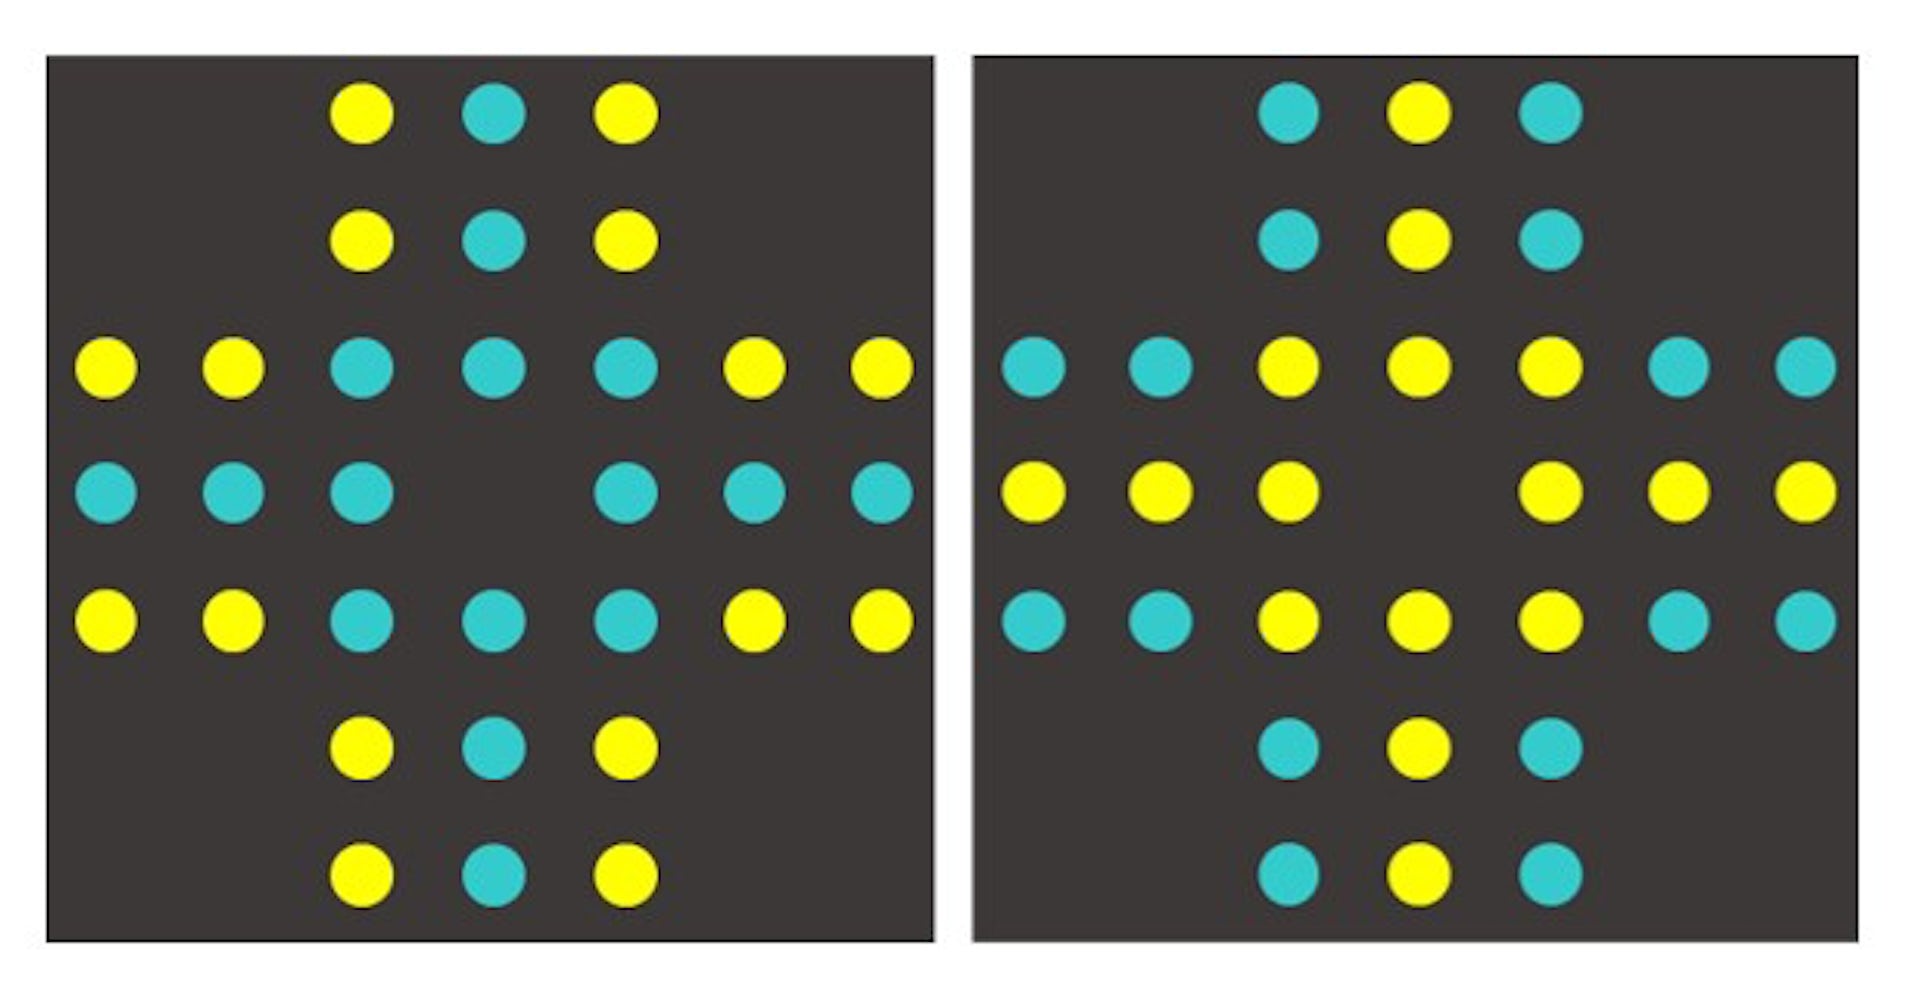 Two images containing a cross shape made up of yellow and blue dots